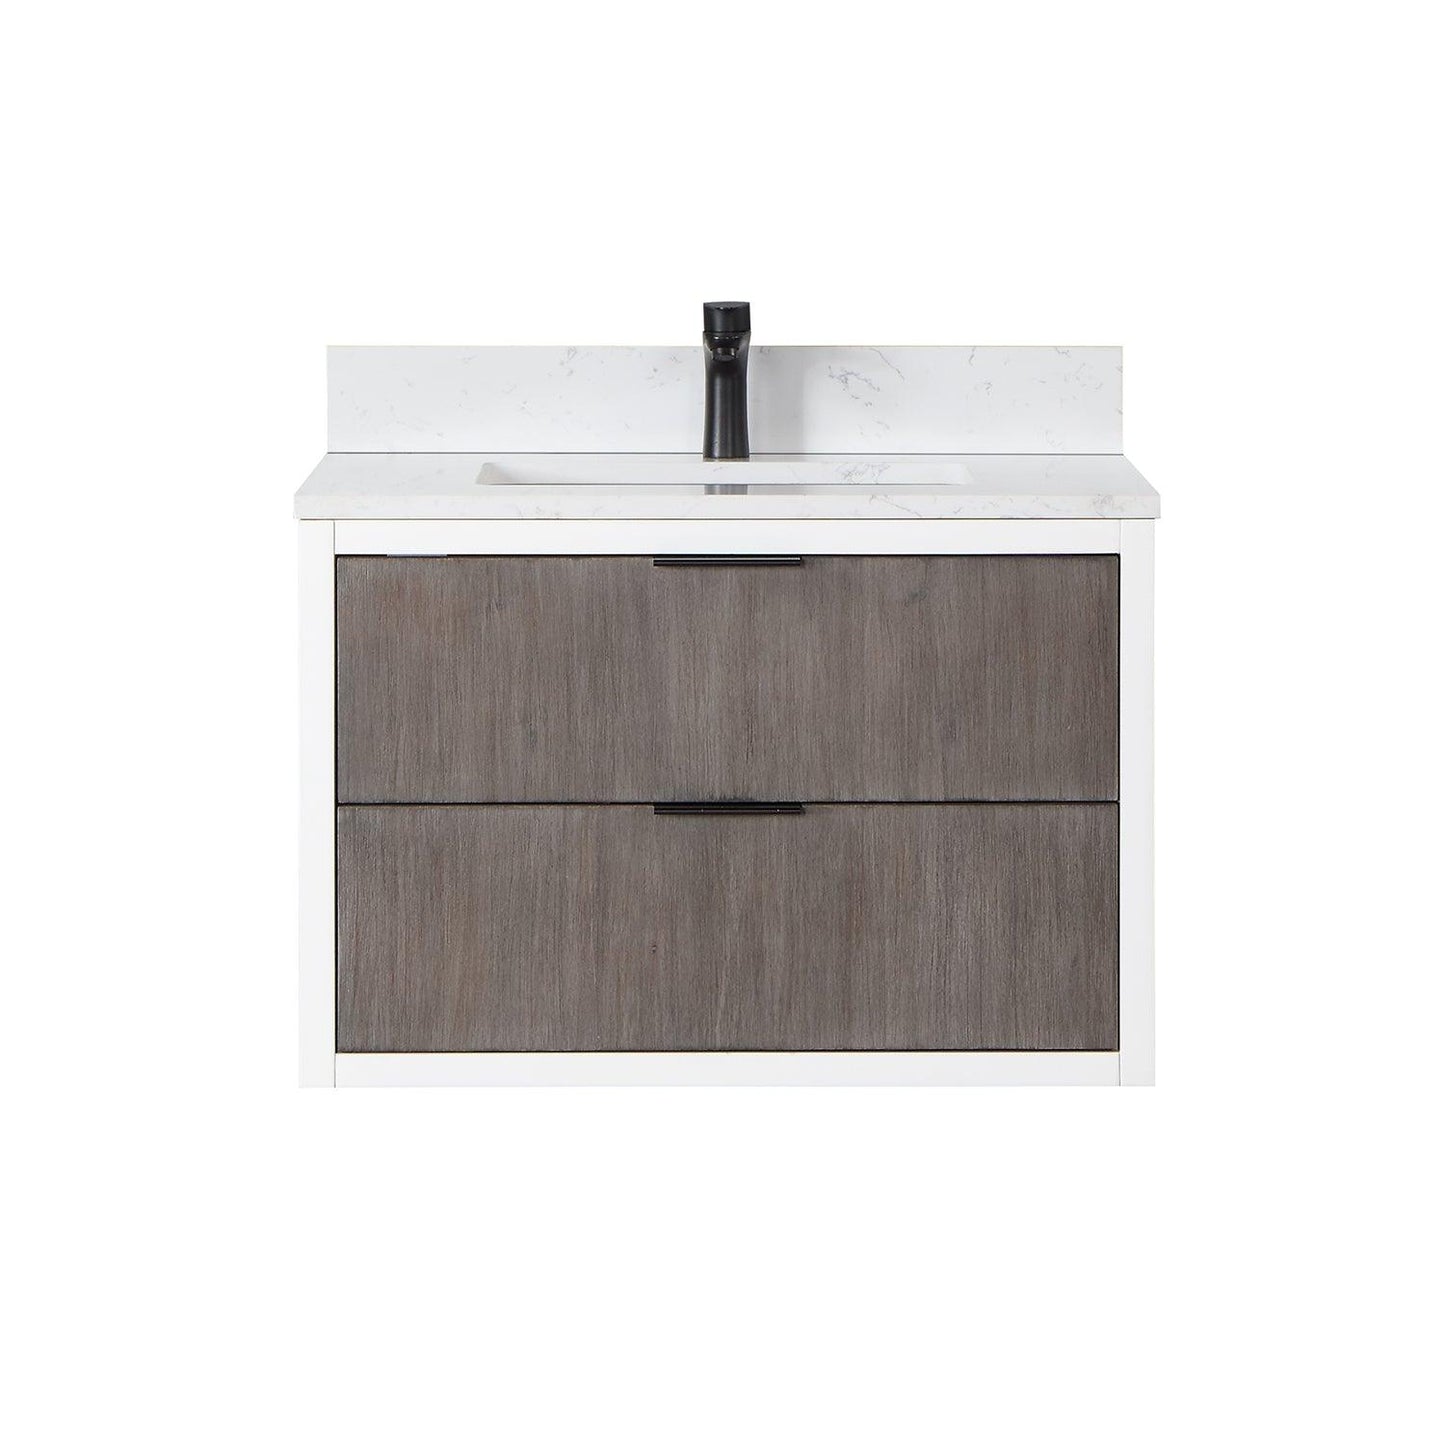 Altair Dione Single Bathroom Vanity with Aosta White Composite Stone Countertop and Optional Mirror - Sea & Stone Bath